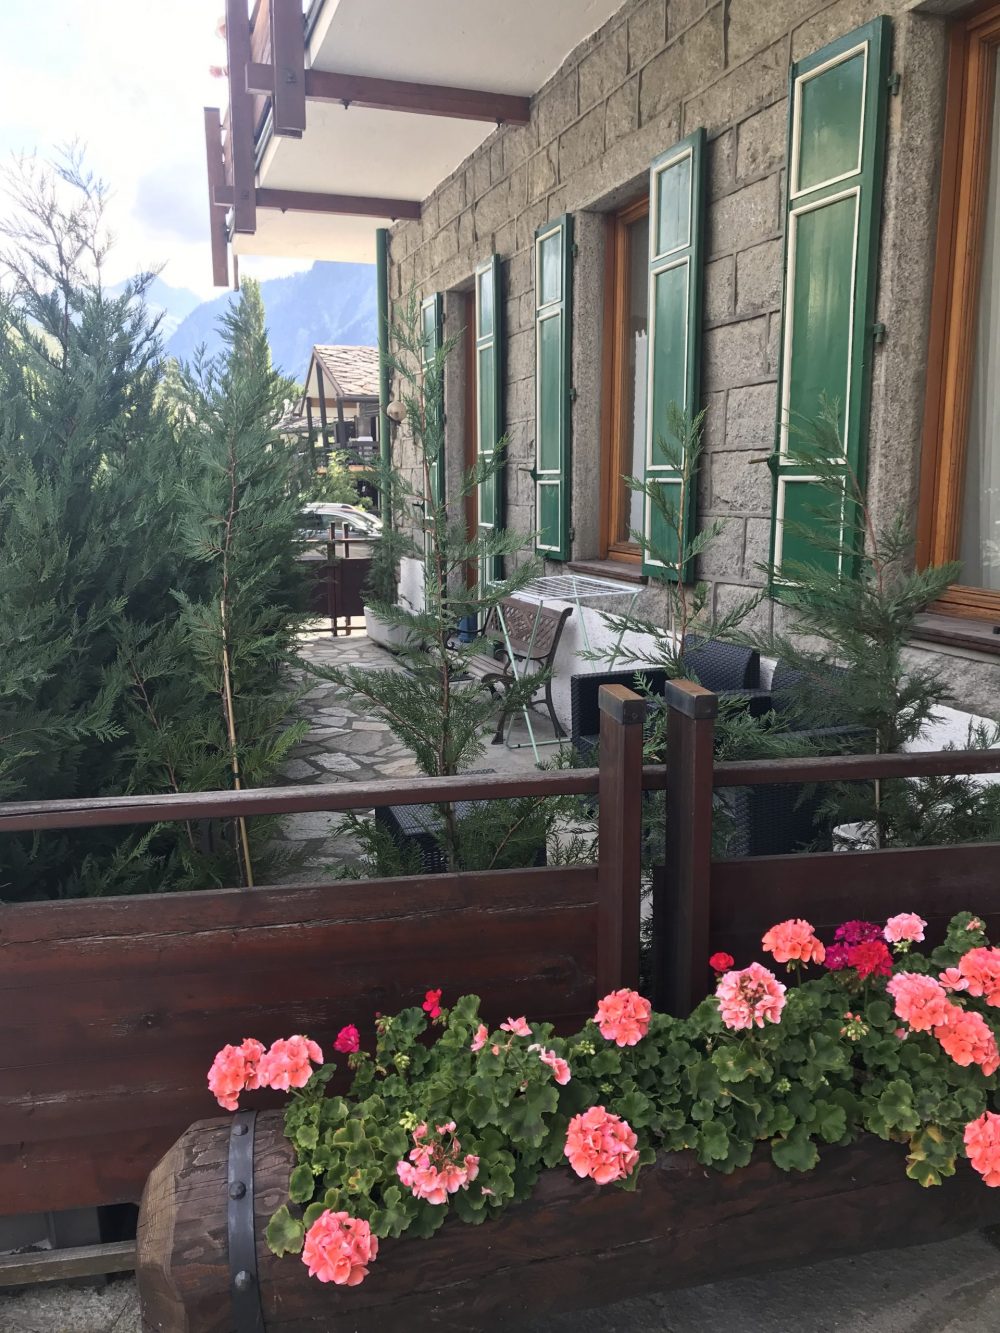 Apartment in Larzey, Courmayeur. My experience of buying a home in the Italian Alps.